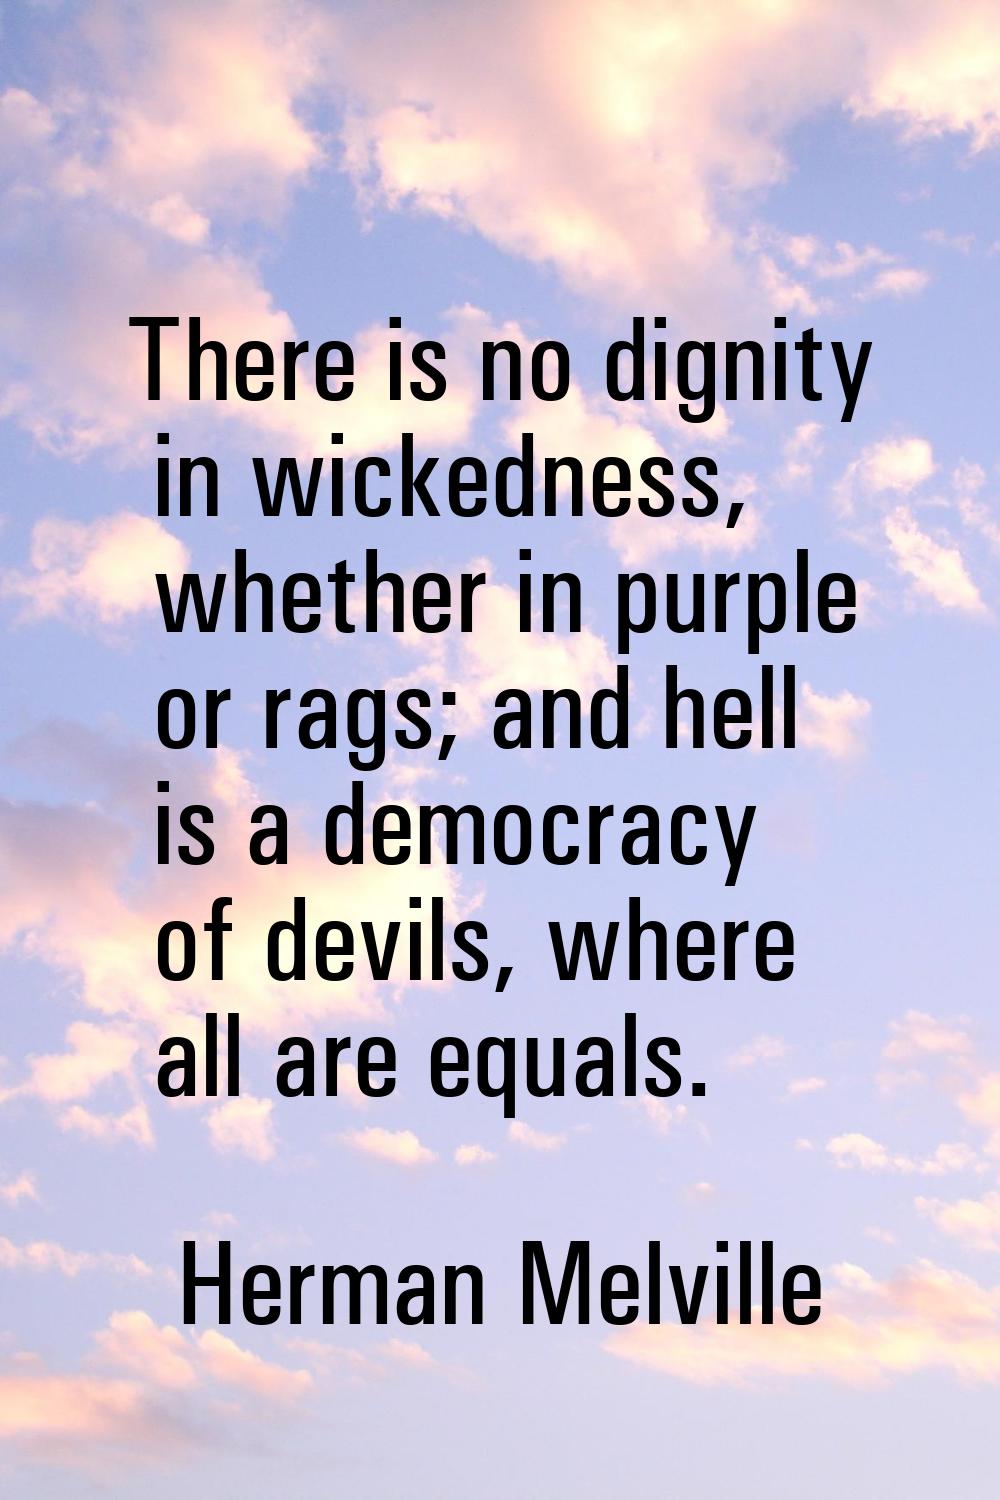 There is no dignity in wickedness, whether in purple or rags; and hell is a democracy of devils, wh